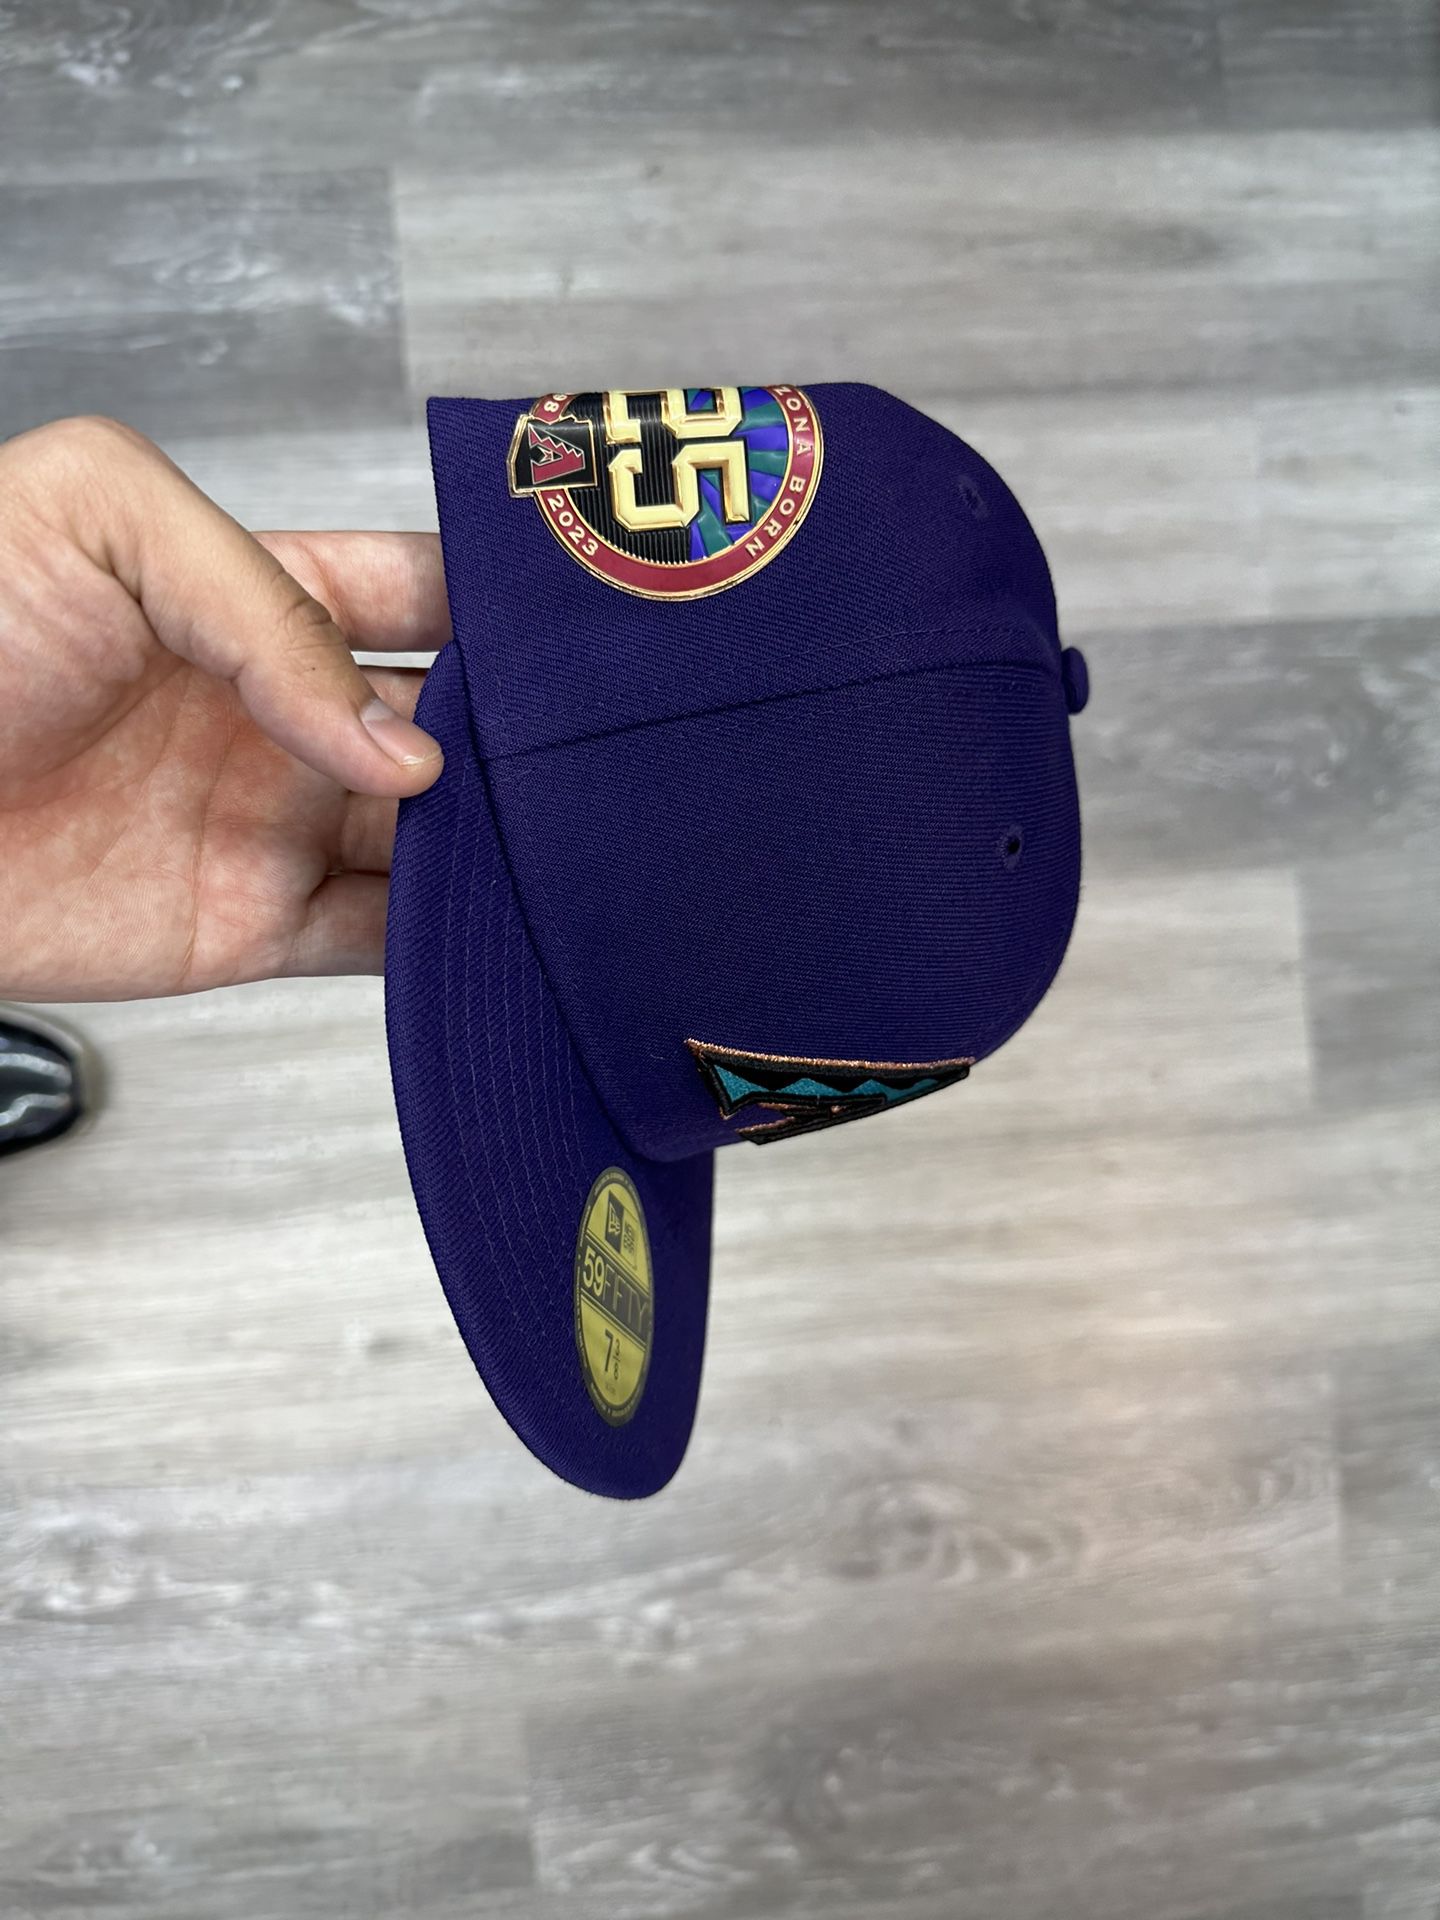 FITTED HATS! $45